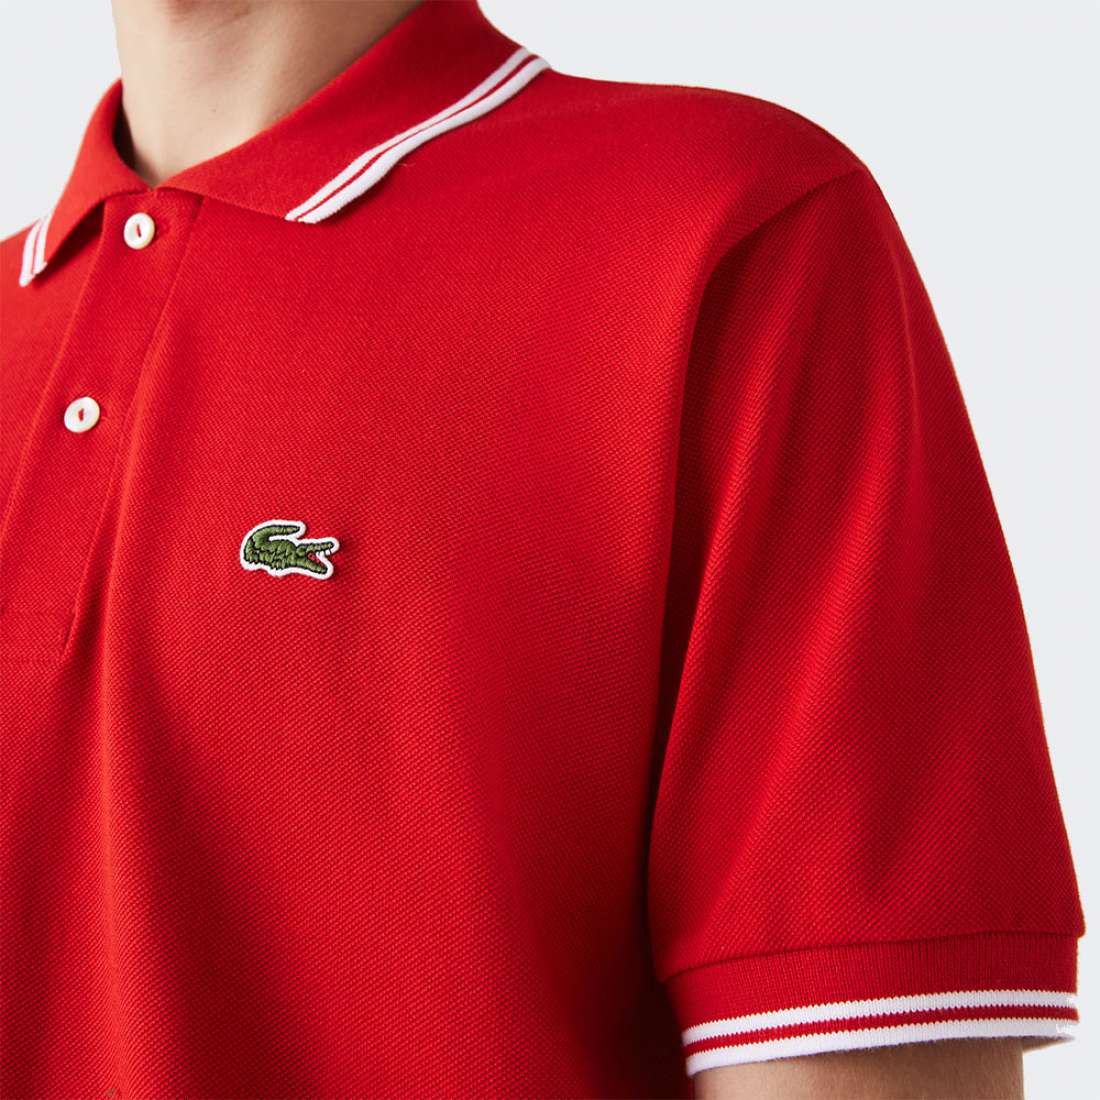 POLO LACOSTE PH238400-564 SLIM FIT ROUGE/BLANC